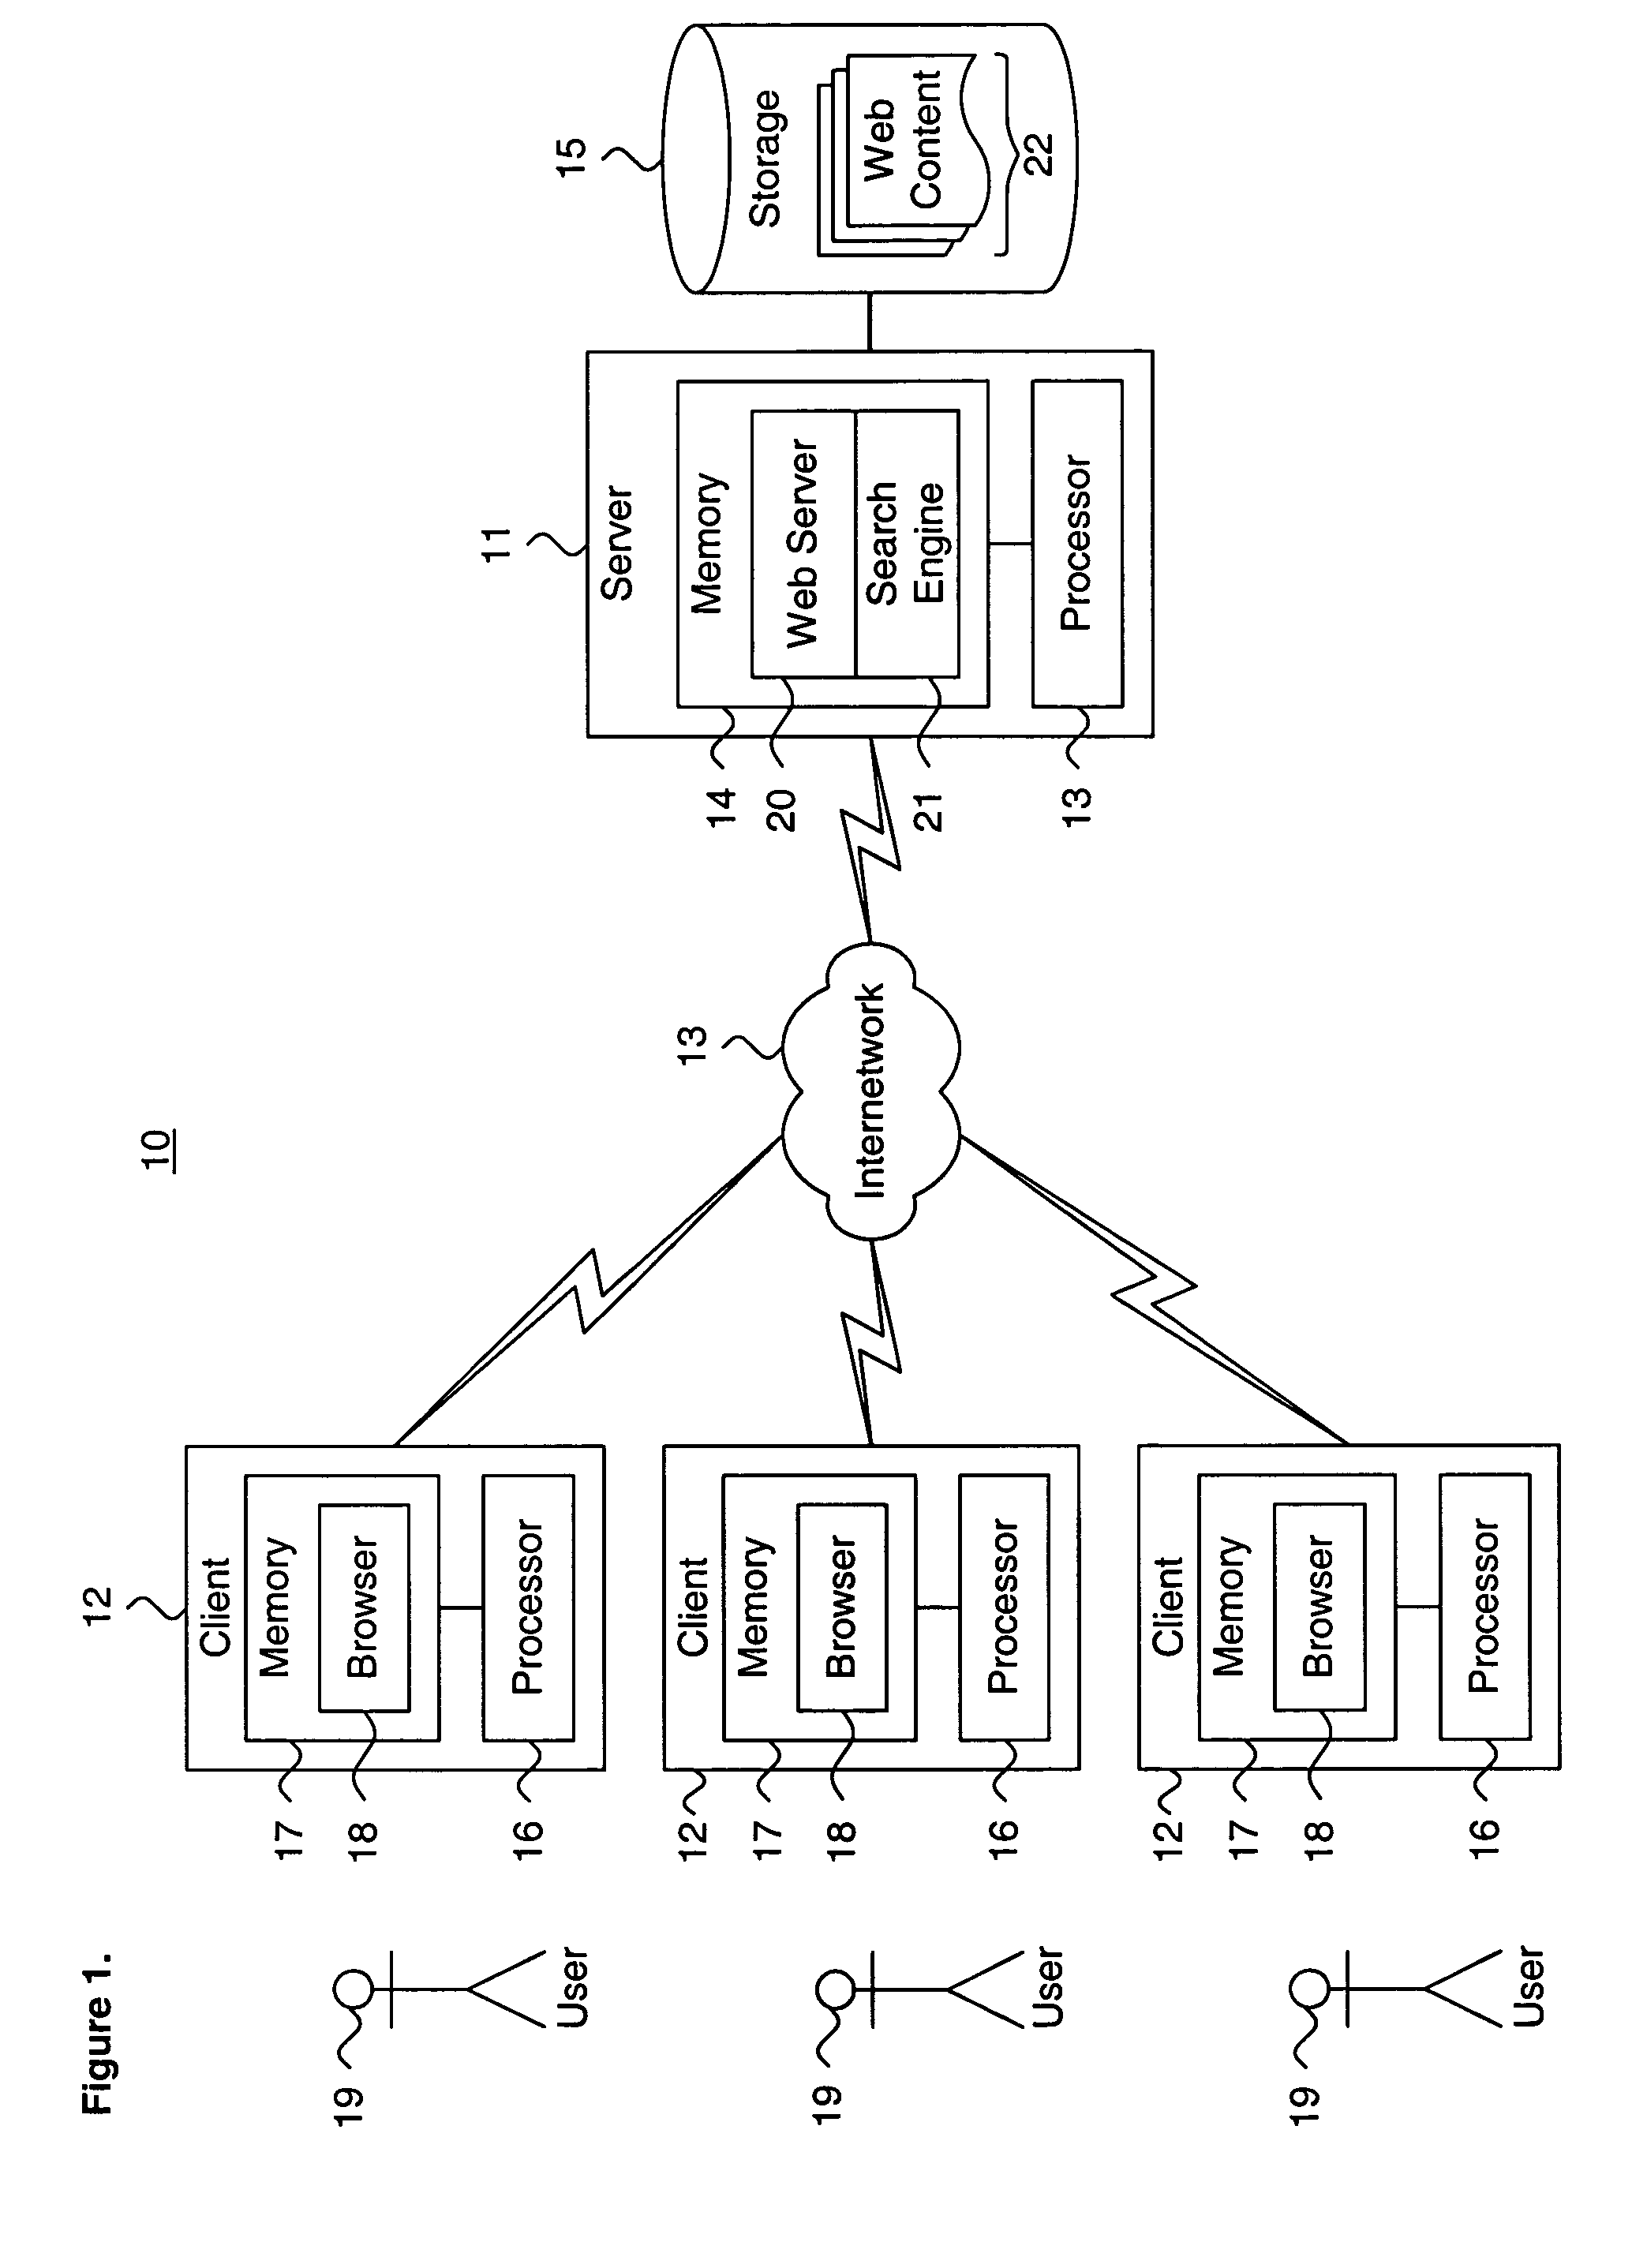 System and method for navigating within a graphical user interface without using a pointing device